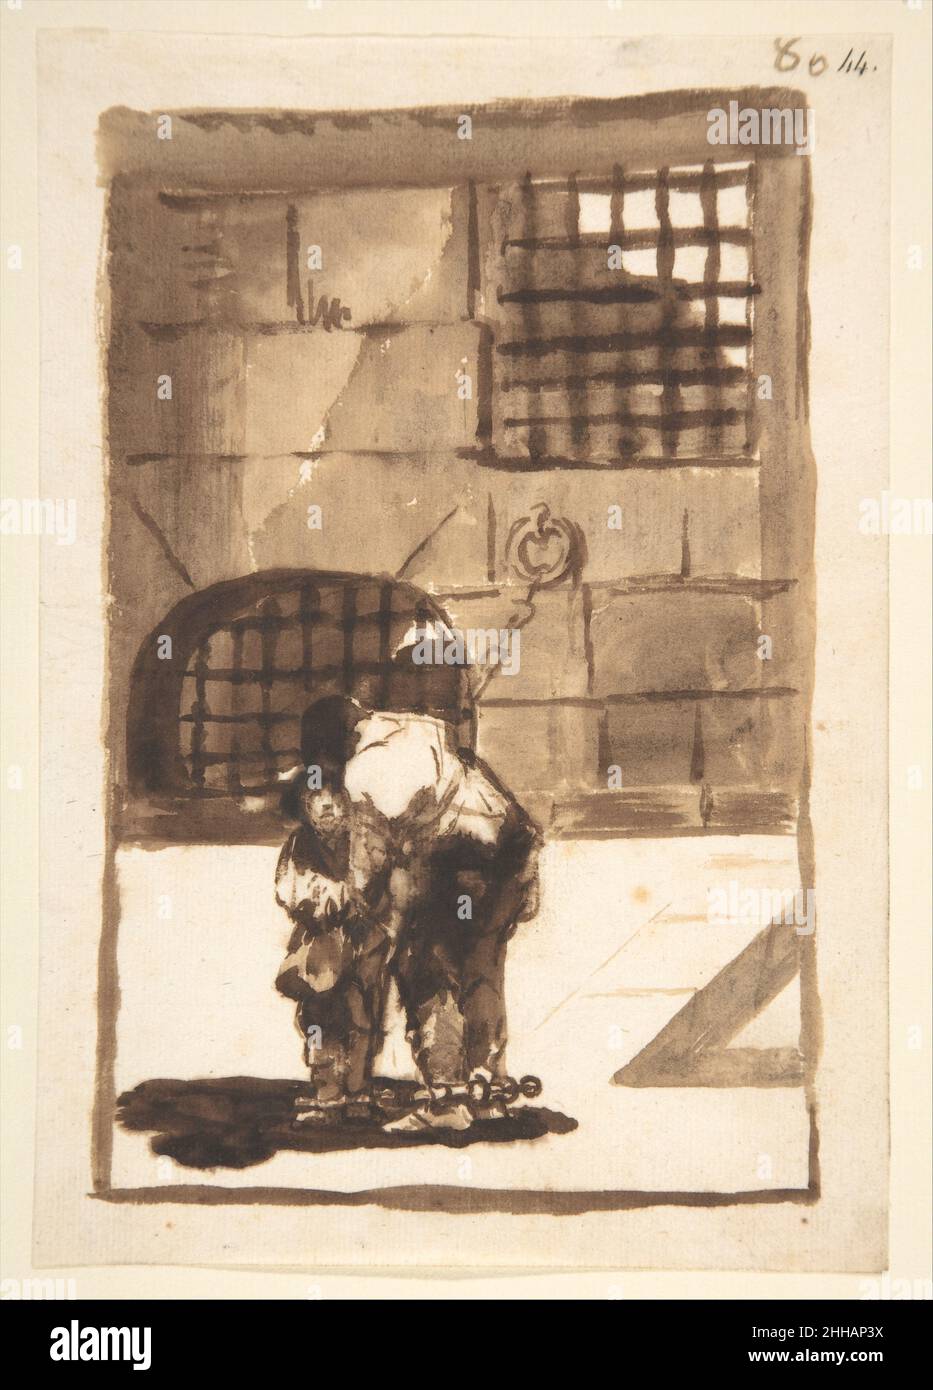 Prisoners in irons; page 80 from the 'Images of Spain' album (F) ca. 1812–20 Goya (Francisco de Goya y Lucientes) Spanish One of the most striking drawings from the album, this work shows a frightened child being comforted by an adult, perhaps his father. Goya conceived a symmetrical composition divided into two distinct tonal levels, a dark and a light section. A shaded demarcation of the step at right and a triangle of light in the window above mirror each other. The geometric rigidity of the underground chamber makes a severe background that underscores the prisoners’ vulnerability. The edg Stock Photo